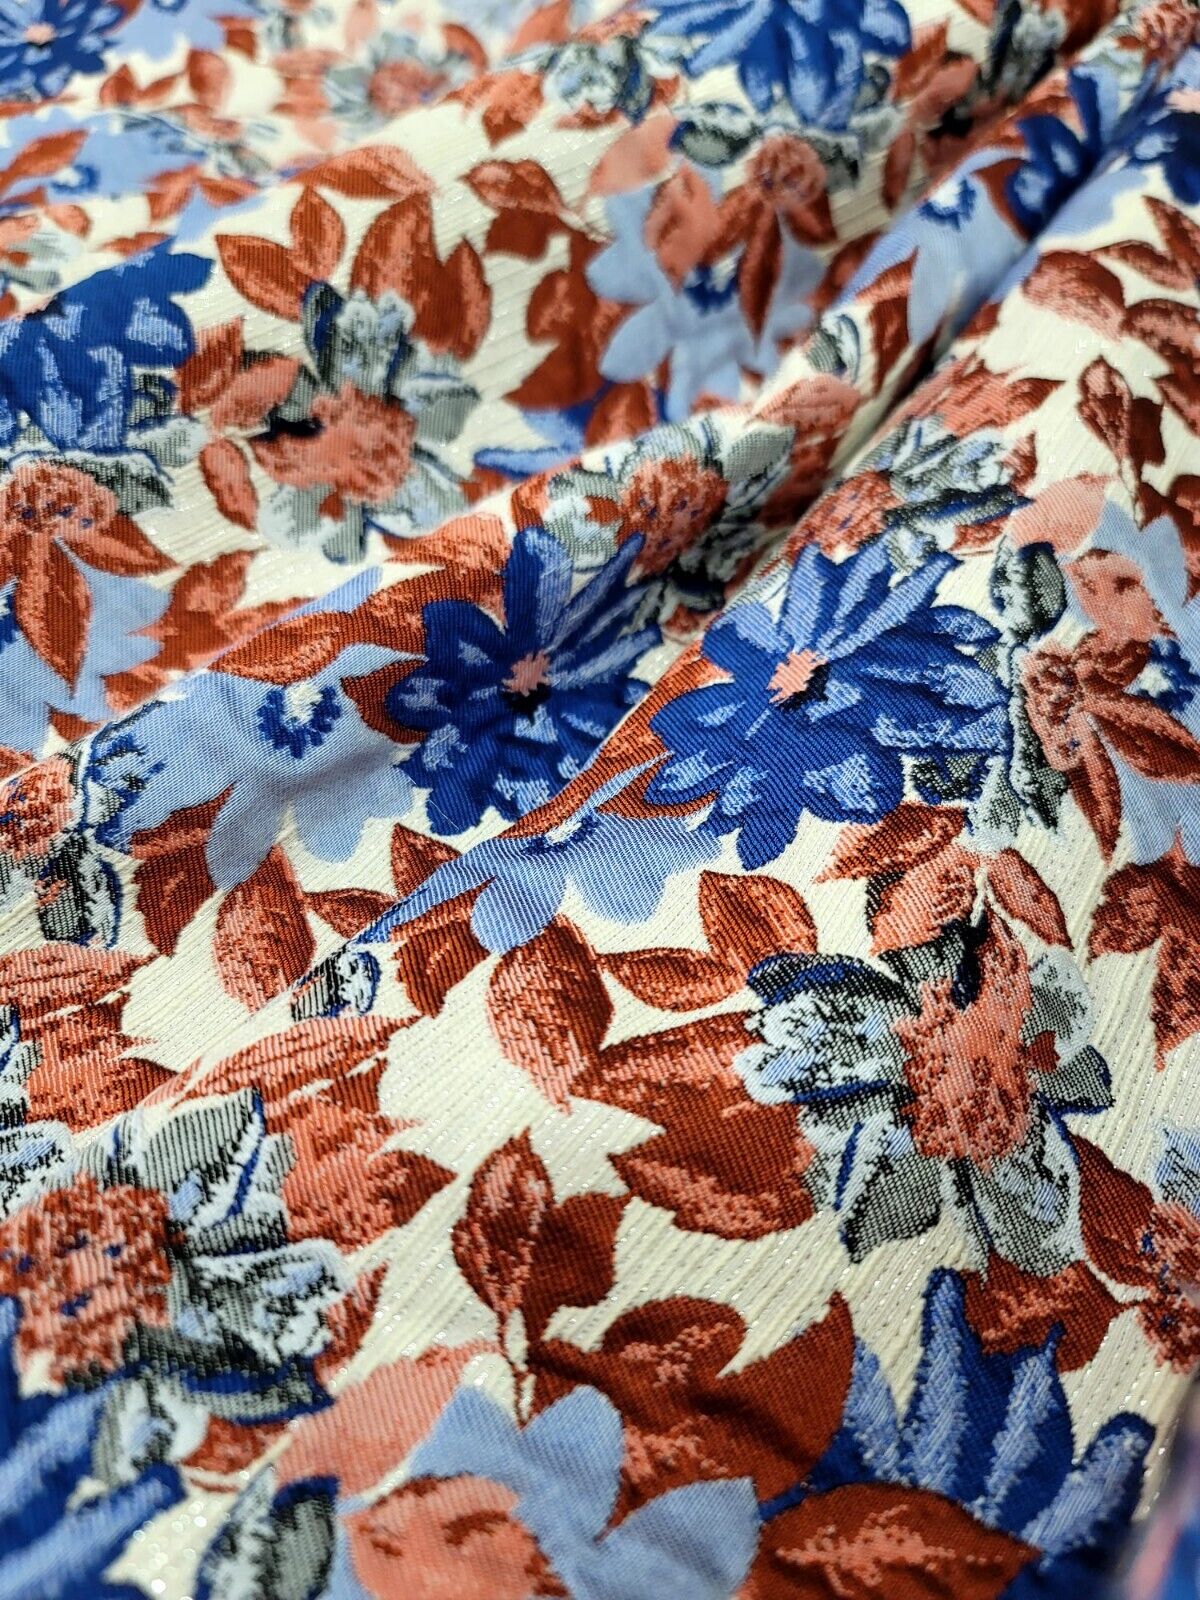 Blue Maroon Coral Floral Chenille Upholstery Brocade Fabric (54 inches) - Sold by the Yard